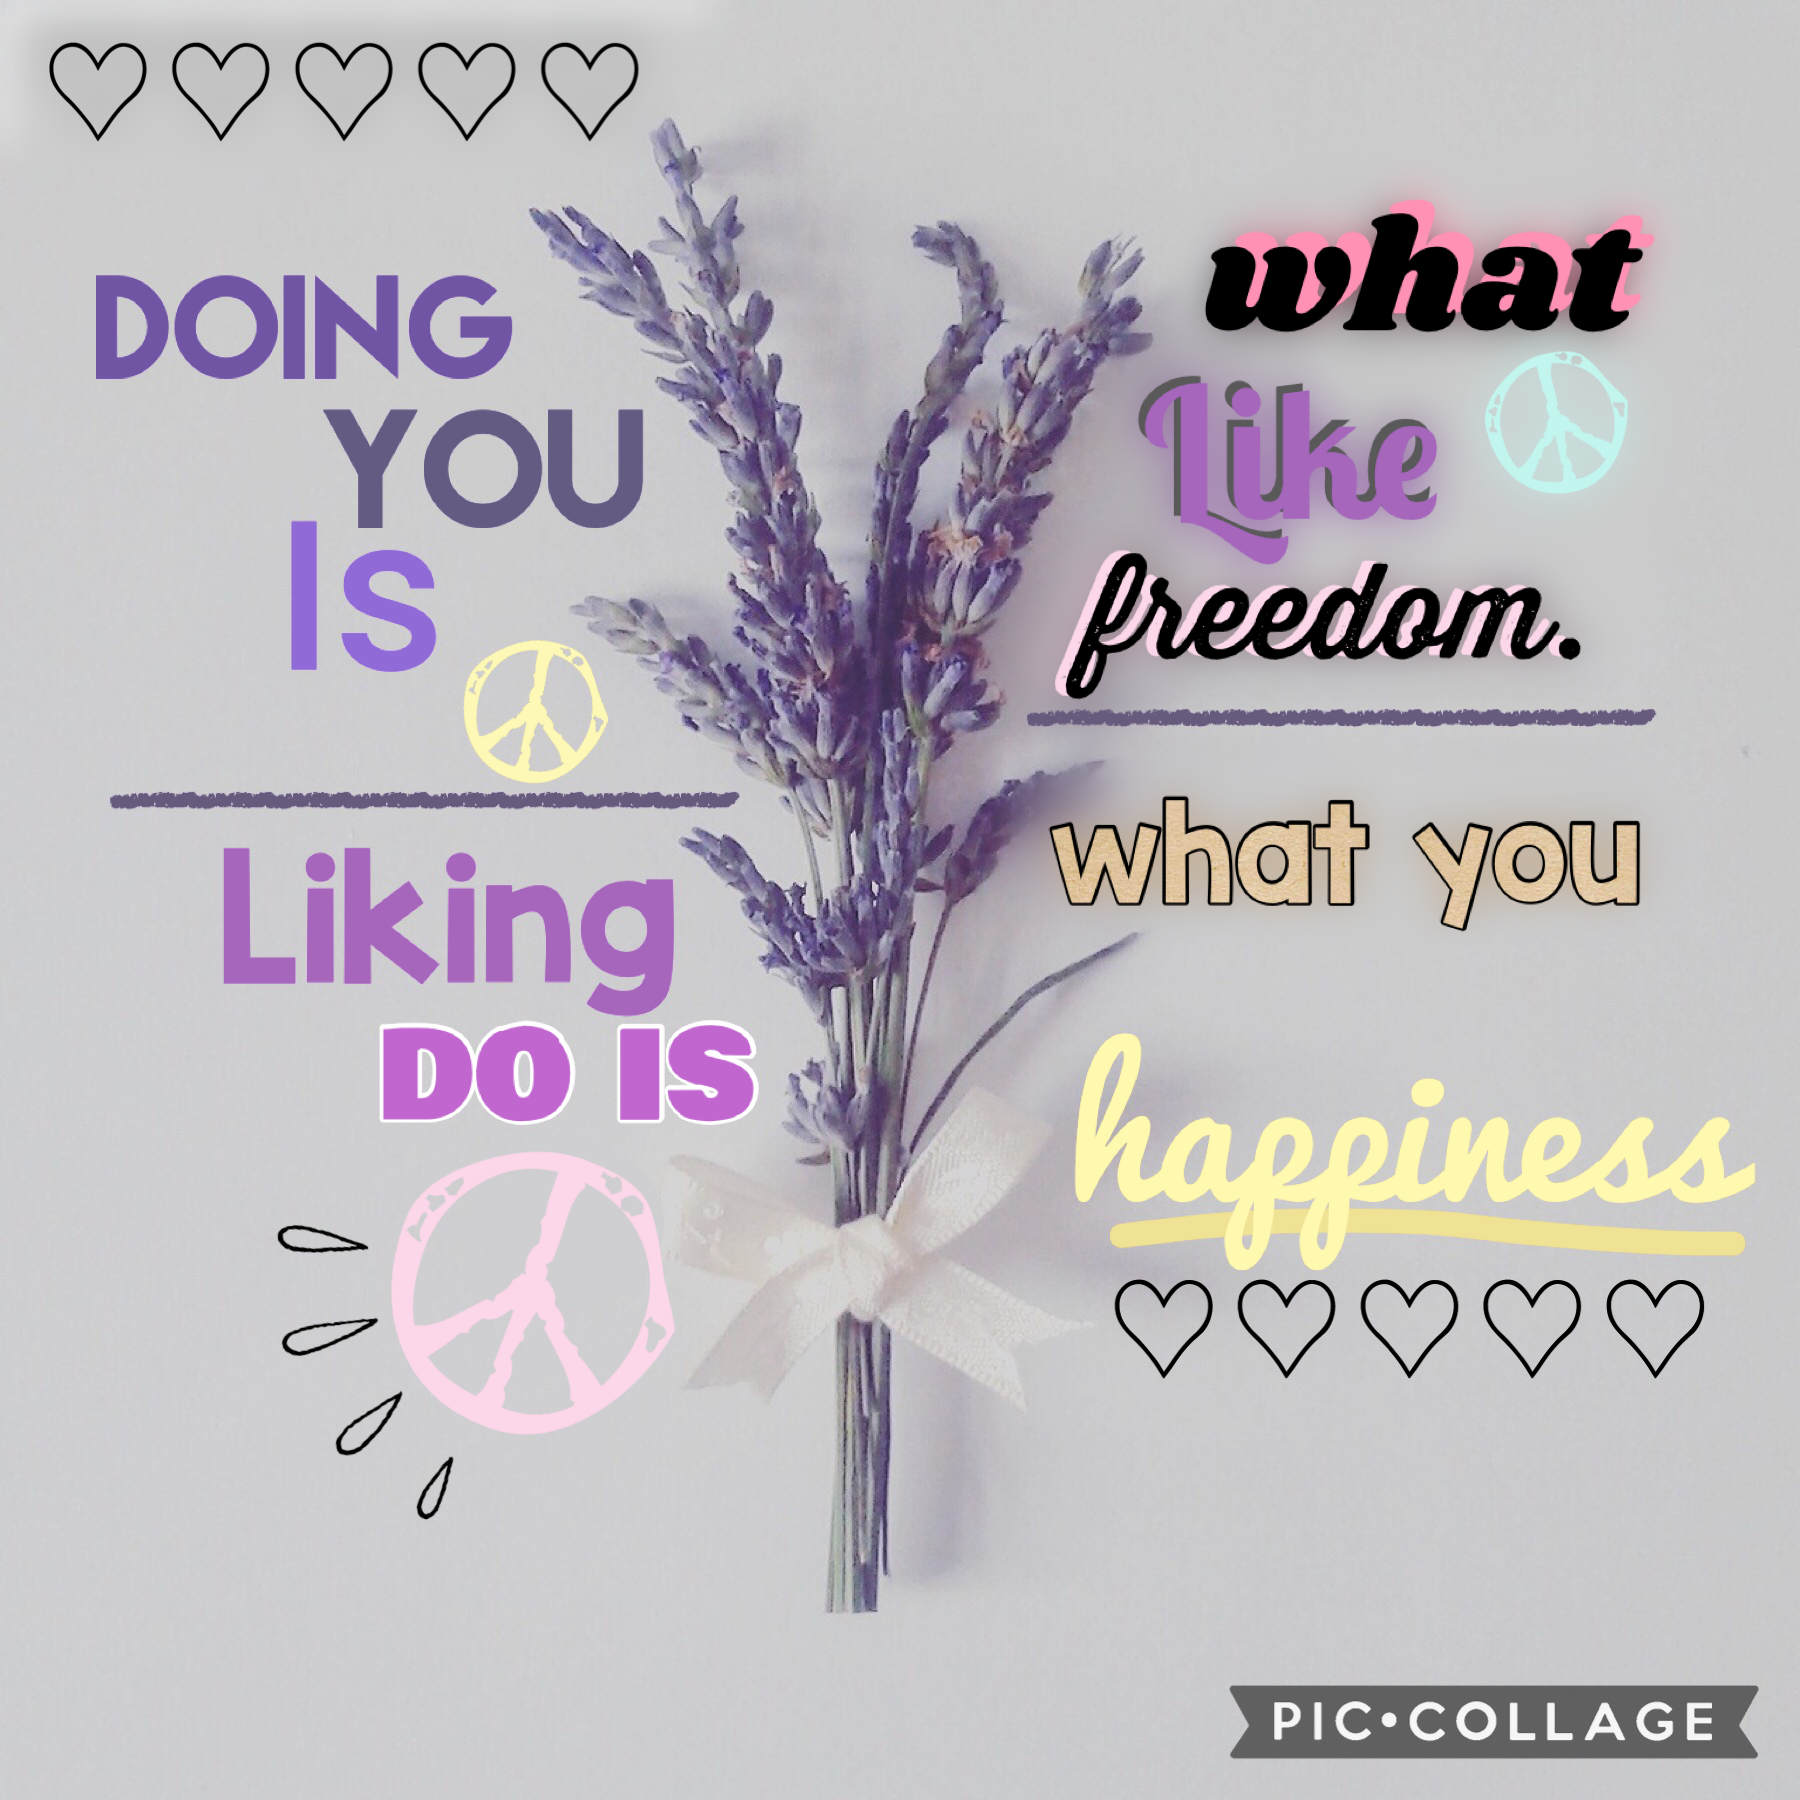 Tap***
Hi! It’s so close for my b-day and I am turning 12!(June 10th)
I made this collage for people how move one into life and to how important peace ☮️ is!
Have a wonderful week!!
29/5/2022